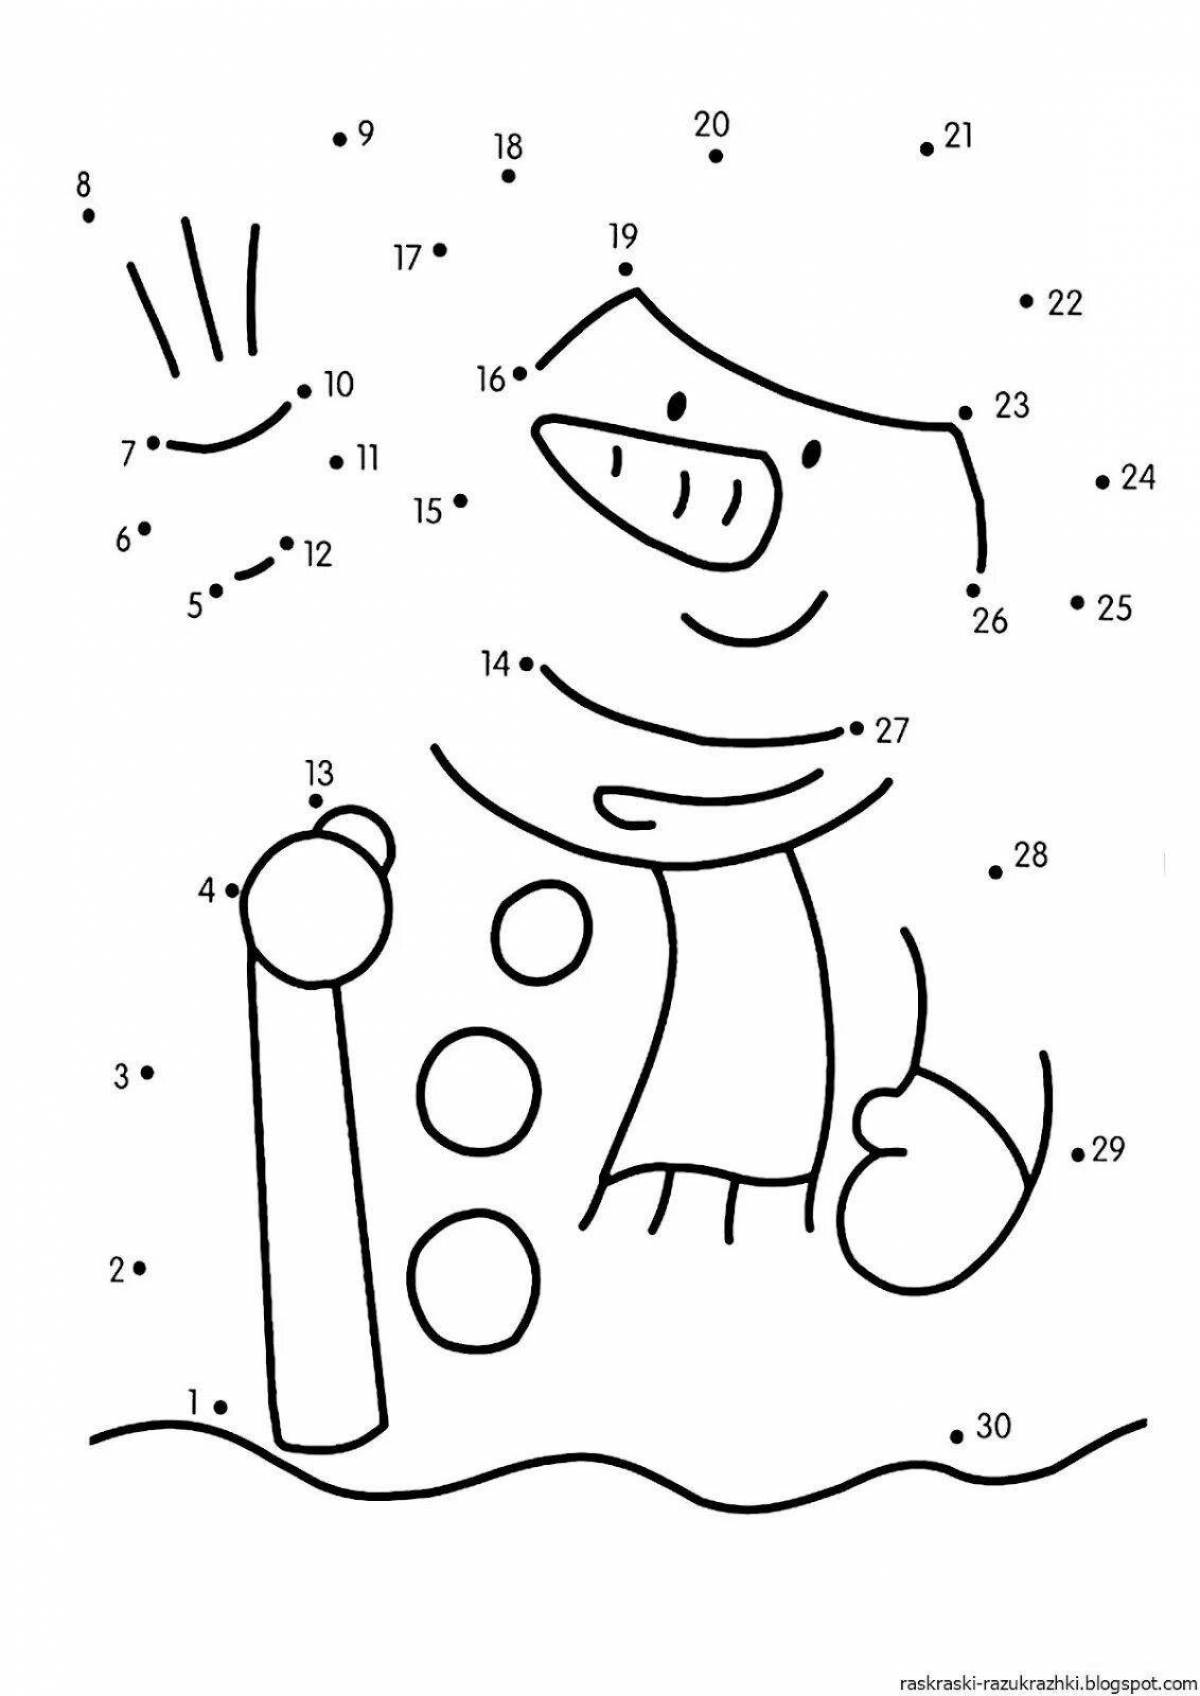 Adorable snowman coloring by numbers